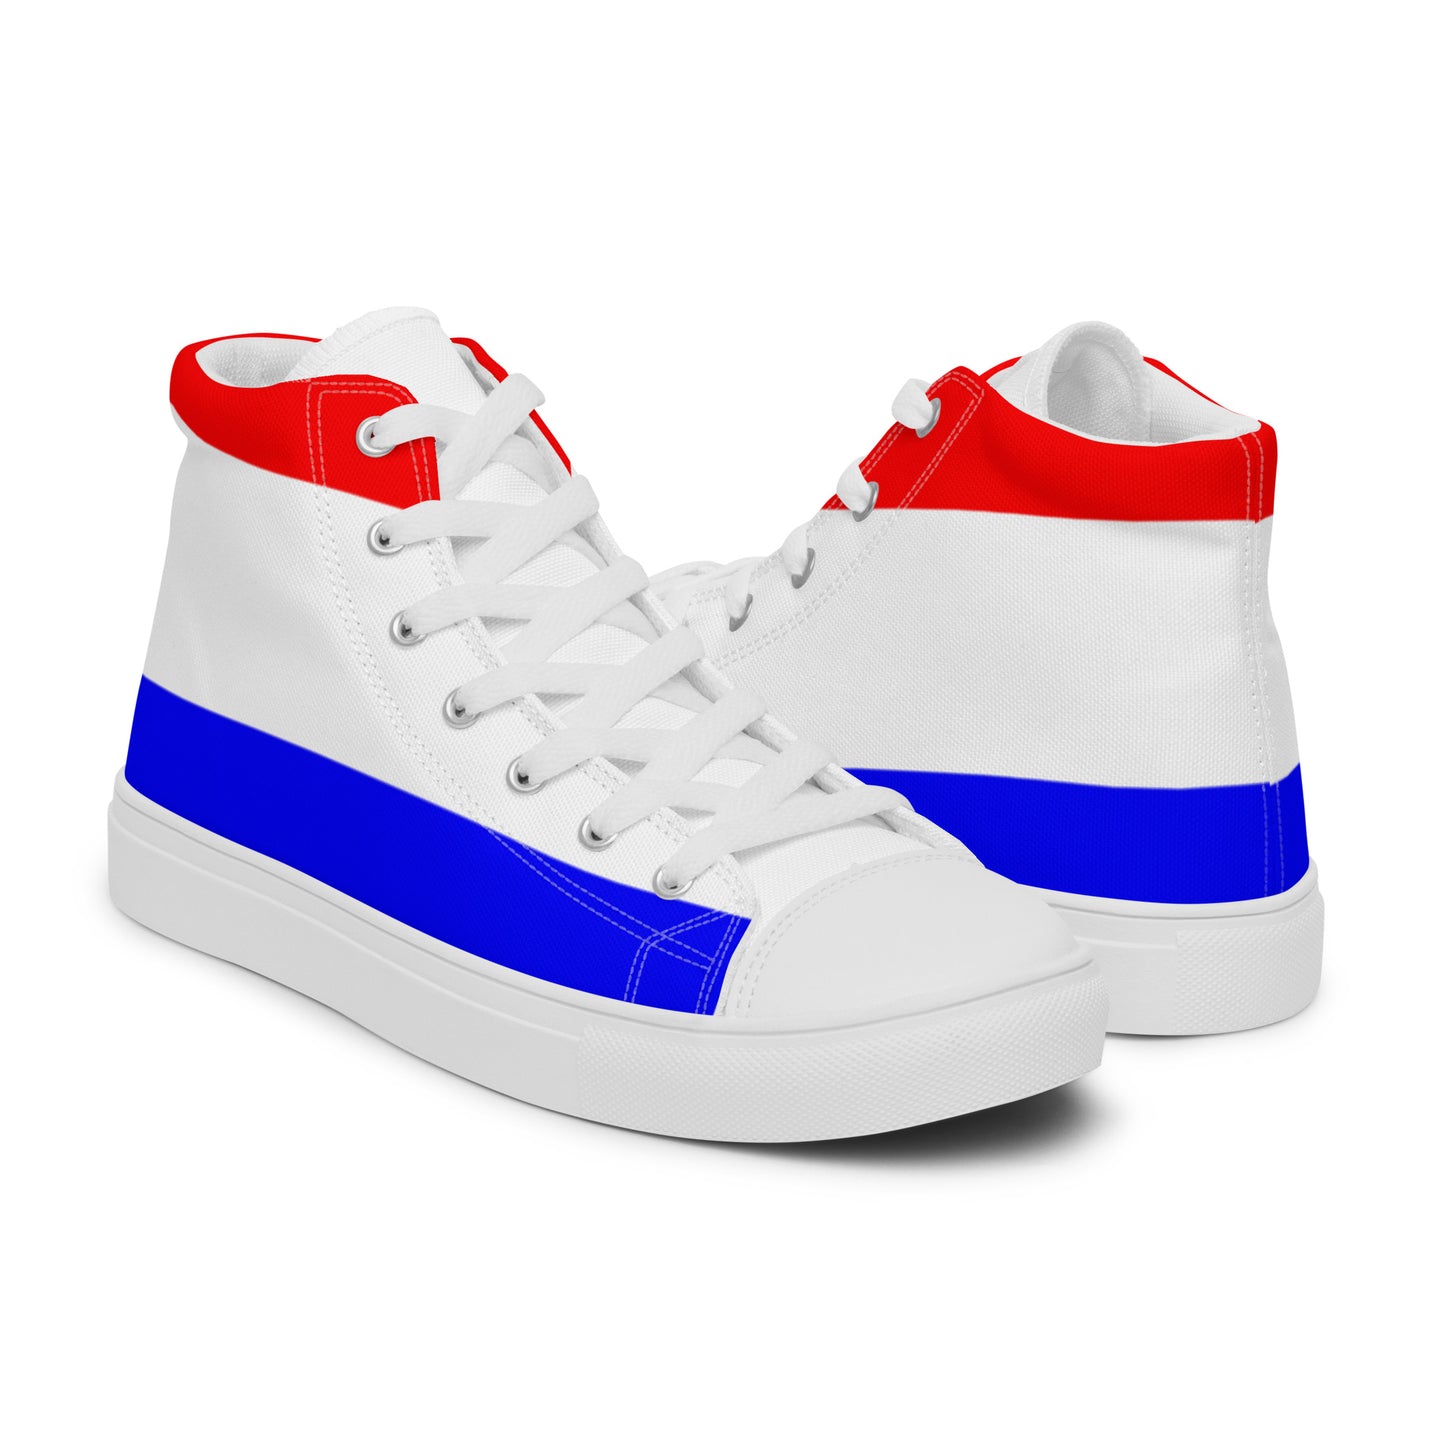 Netherland Flag - Sustainably Made Men’s high top canvas shoes